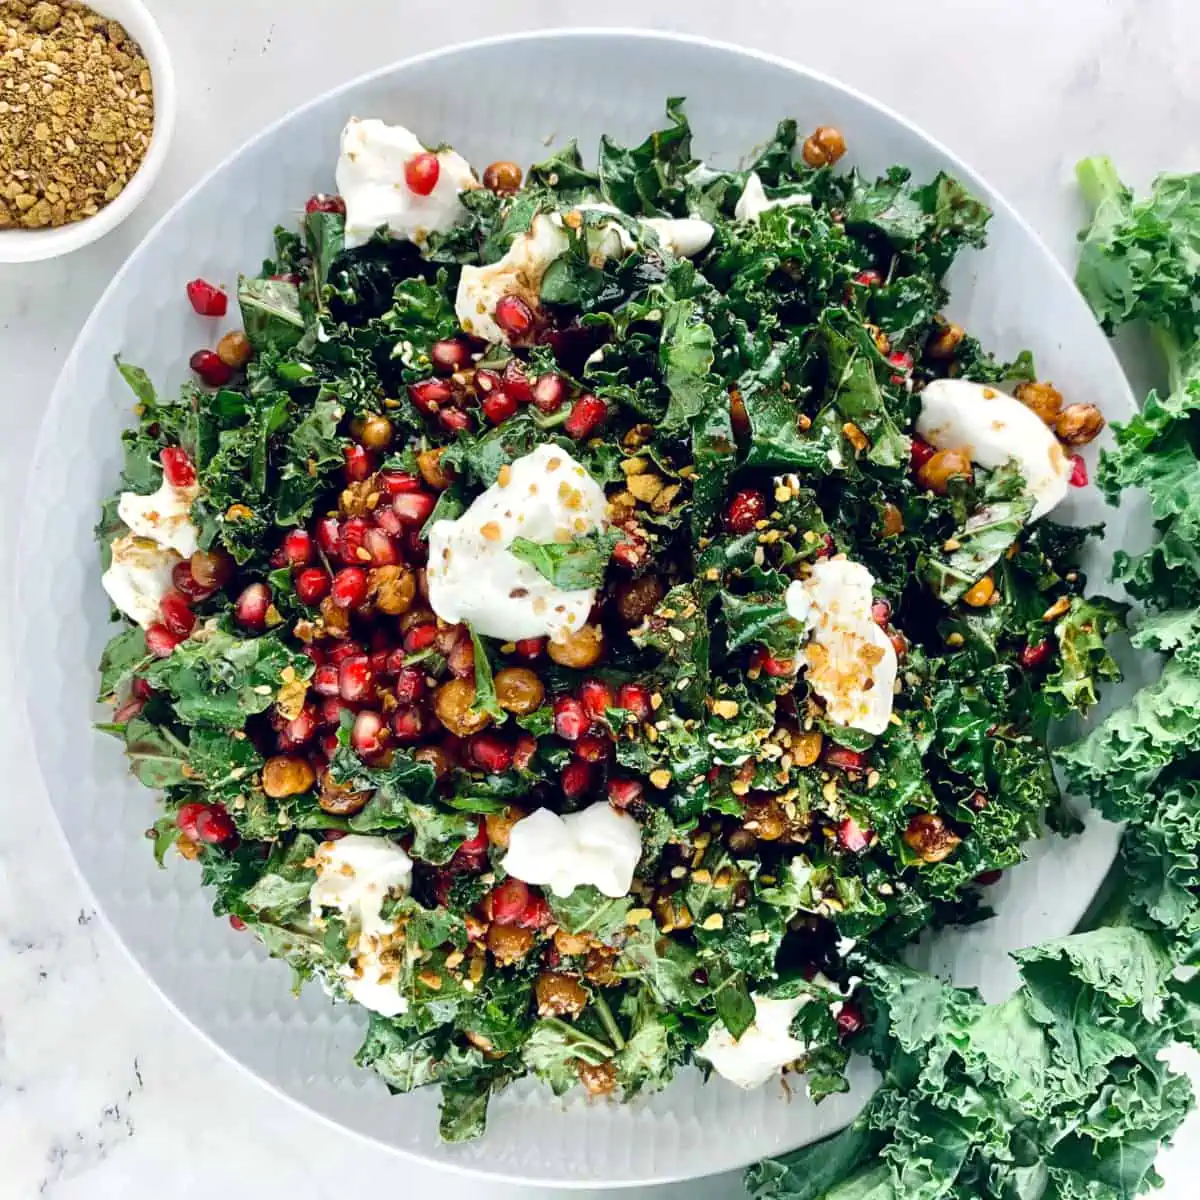 Kale pomegranat salad on a white plate with kale and dukkah on the side.